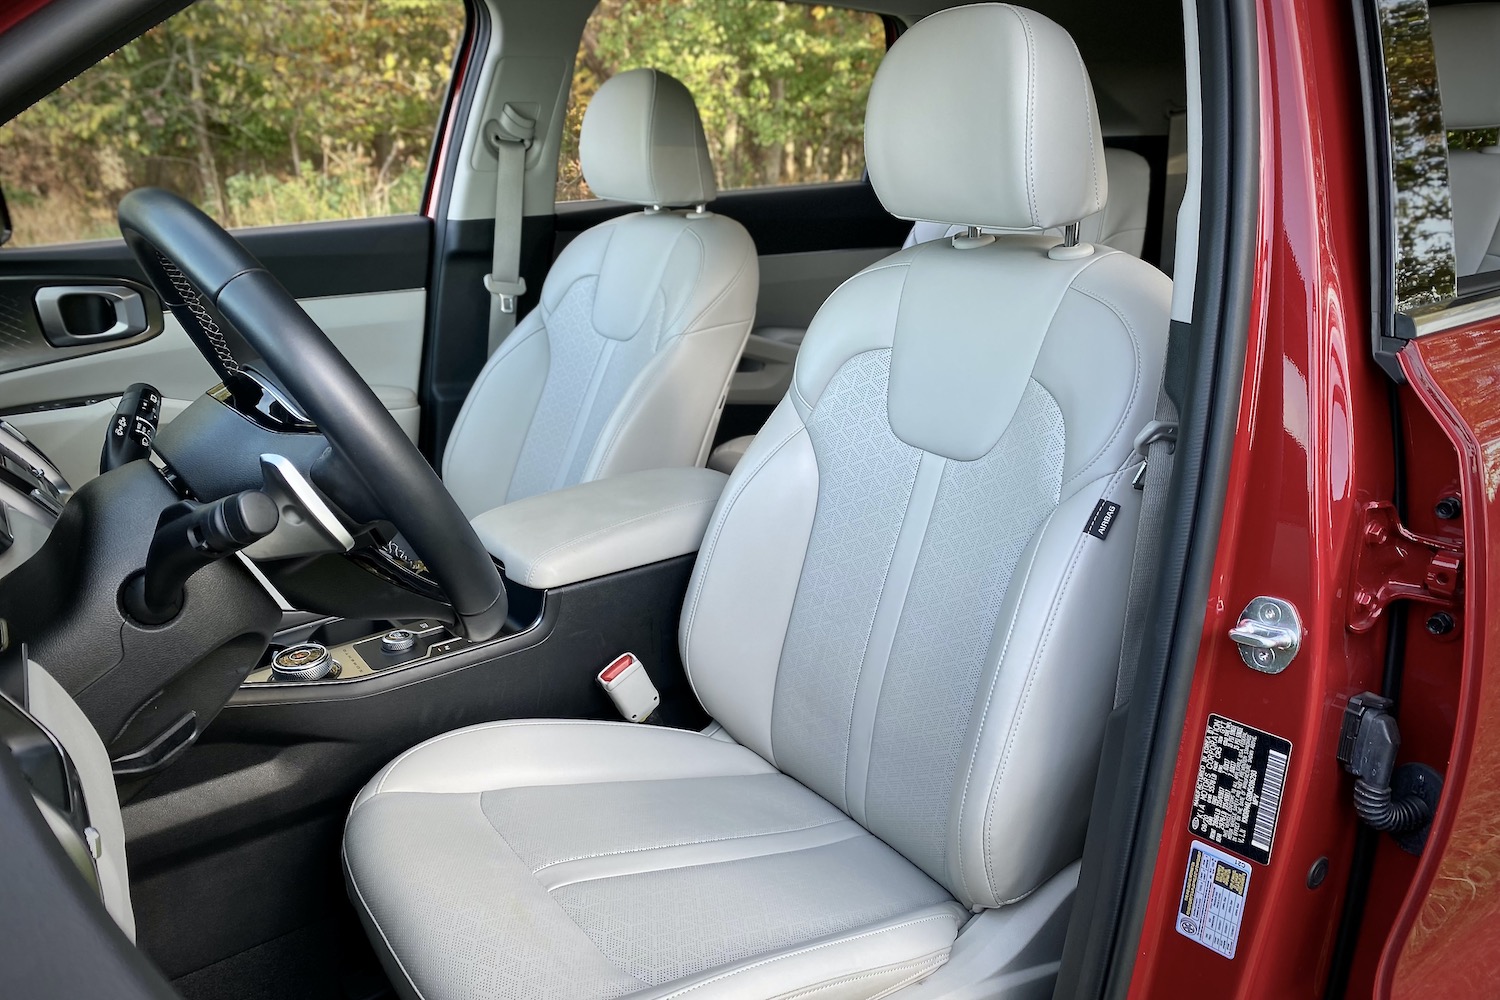 Driver's seat in the 2021 Kia Sorento Hybrid with trees in the background.